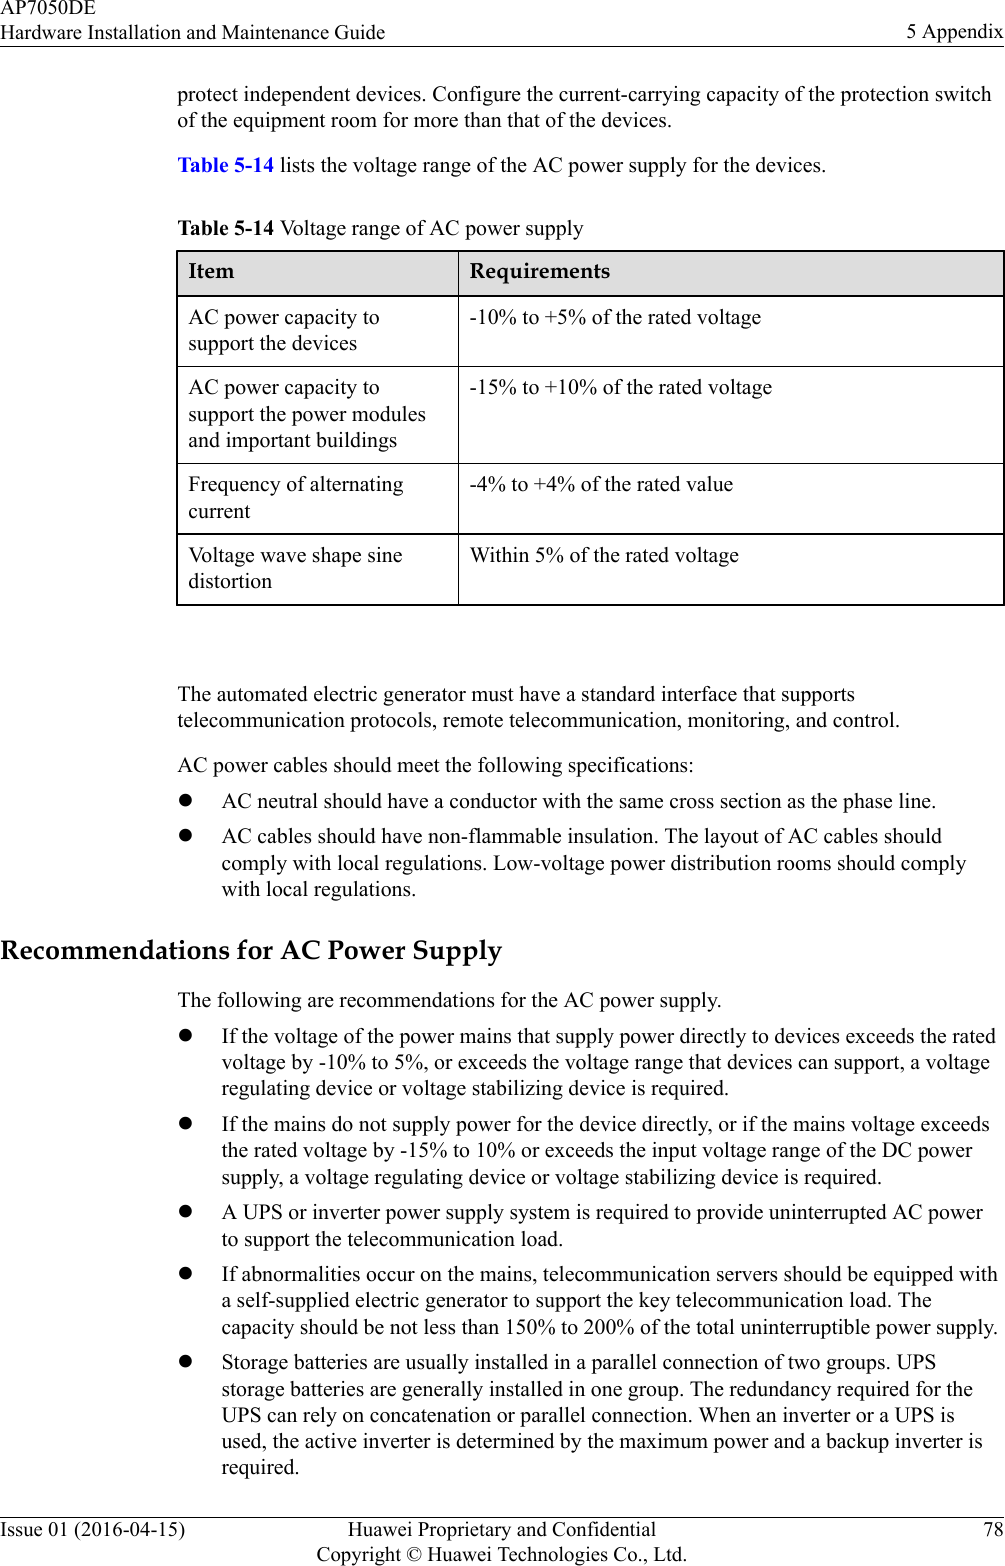 protect independent devices. Configure the current-carrying capacity of the protection switchof the equipment room for more than that of the devices.Table 5-14 lists the voltage range of the AC power supply for the devices.Table 5-14 Voltage range of AC power supplyItem RequirementsAC power capacity tosupport the devices-10% to +5% of the rated voltageAC power capacity tosupport the power modulesand important buildings-15% to +10% of the rated voltageFrequency of alternatingcurrent-4% to +4% of the rated valueVoltage wave shape sinedistortionWithin 5% of the rated voltage The automated electric generator must have a standard interface that supportstelecommunication protocols, remote telecommunication, monitoring, and control.AC power cables should meet the following specifications:lAC neutral should have a conductor with the same cross section as the phase line.lAC cables should have non-flammable insulation. The layout of AC cables shouldcomply with local regulations. Low-voltage power distribution rooms should complywith local regulations.Recommendations for AC Power SupplyThe following are recommendations for the AC power supply.lIf the voltage of the power mains that supply power directly to devices exceeds the ratedvoltage by -10% to 5%, or exceeds the voltage range that devices can support, a voltageregulating device or voltage stabilizing device is required.lIf the mains do not supply power for the device directly, or if the mains voltage exceedsthe rated voltage by -15% to 10% or exceeds the input voltage range of the DC powersupply, a voltage regulating device or voltage stabilizing device is required.lA UPS or inverter power supply system is required to provide uninterrupted AC powerto support the telecommunication load.lIf abnormalities occur on the mains, telecommunication servers should be equipped witha self-supplied electric generator to support the key telecommunication load. Thecapacity should be not less than 150% to 200% of the total uninterruptible power supply.lStorage batteries are usually installed in a parallel connection of two groups. UPSstorage batteries are generally installed in one group. The redundancy required for theUPS can rely on concatenation or parallel connection. When an inverter or a UPS isused, the active inverter is determined by the maximum power and a backup inverter isrequired.AP7050DEHardware Installation and Maintenance Guide 5 AppendixIssue 01 (2016-04-15) Huawei Proprietary and ConfidentialCopyright © Huawei Technologies Co., Ltd.78